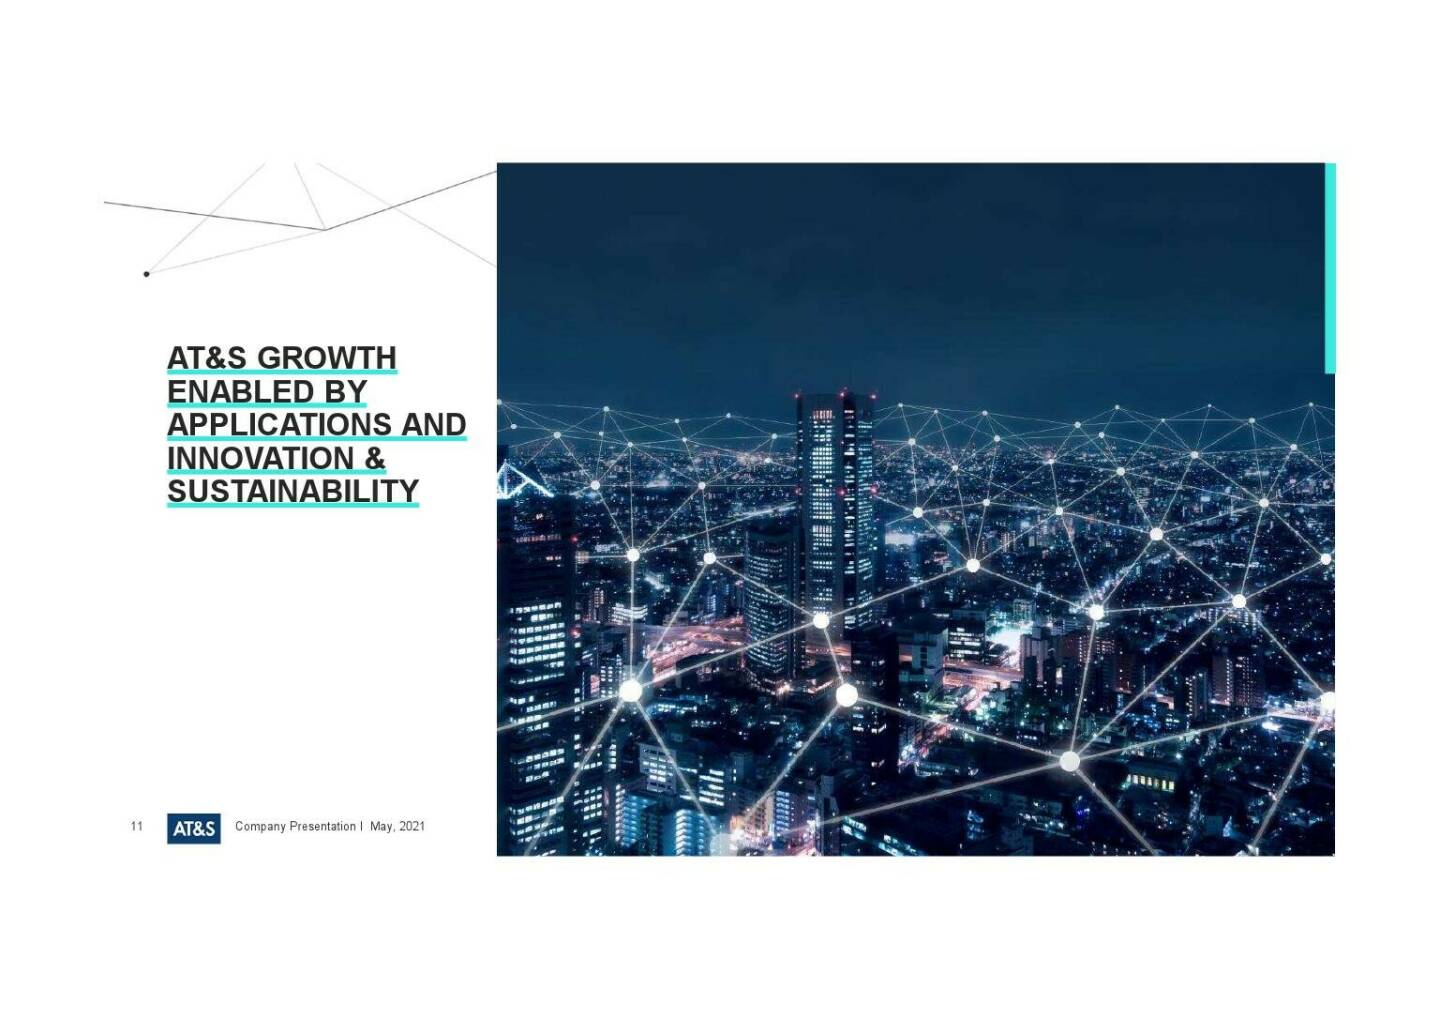 AT&S - AT&S growth enabled by applications and innovation & sustainability 